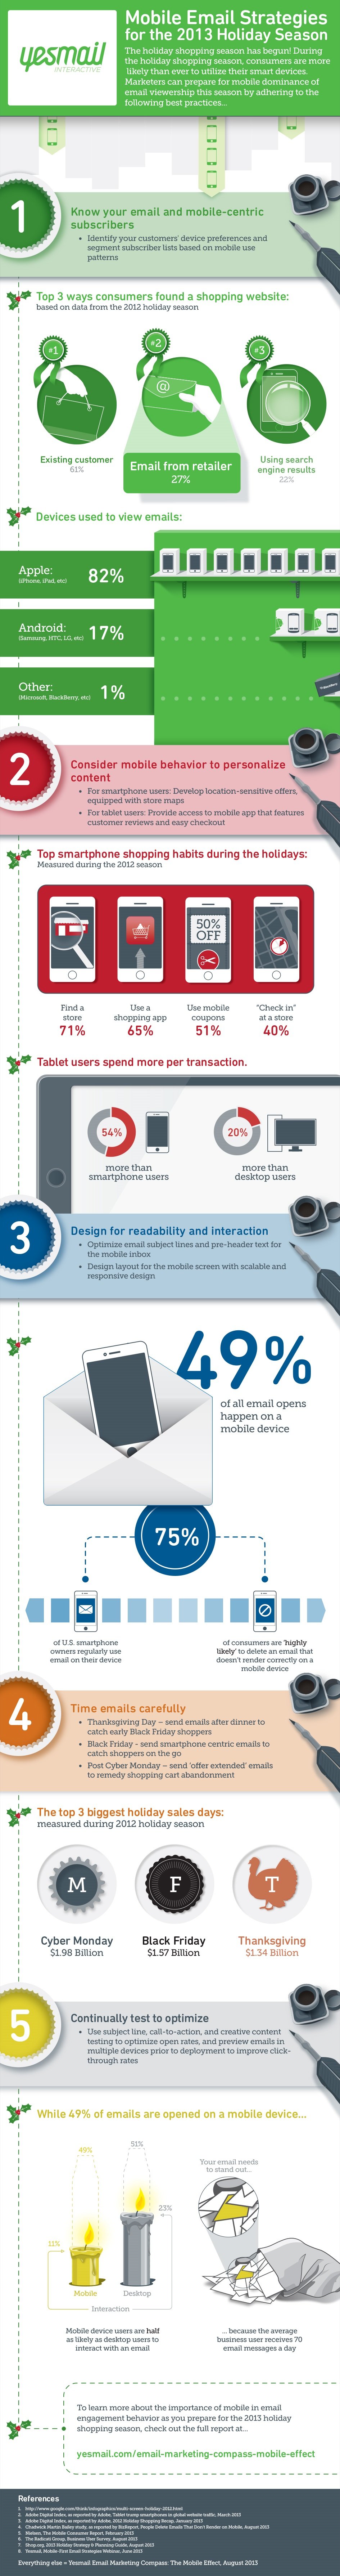 Mobile-Email-Strategies-for-the-2013-Holiday-Season-infographic